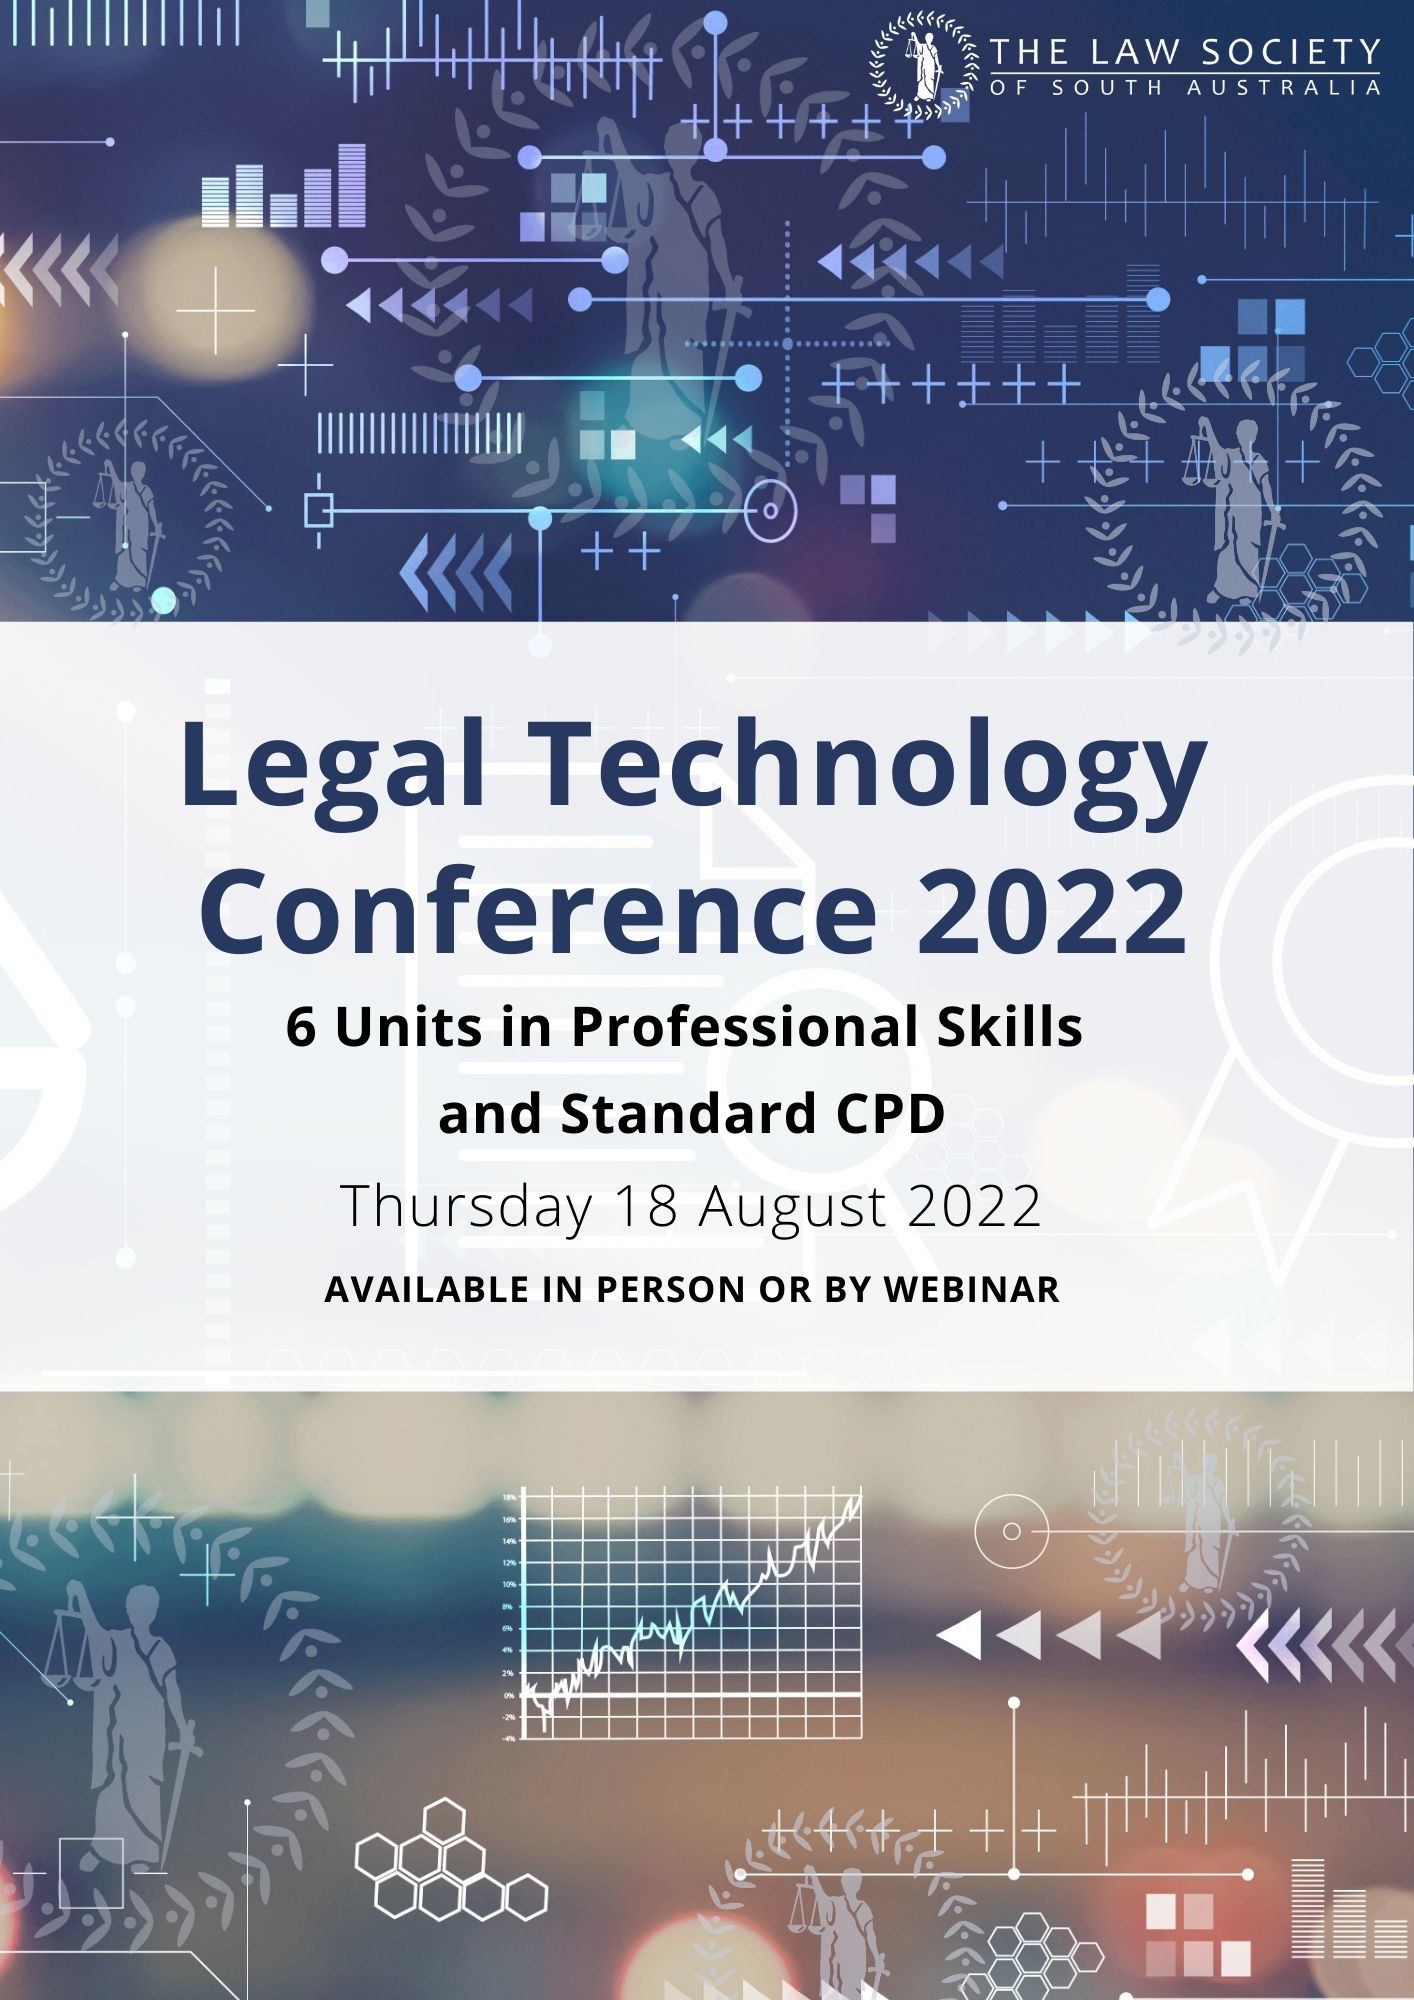 Legal Technology Conference 2022